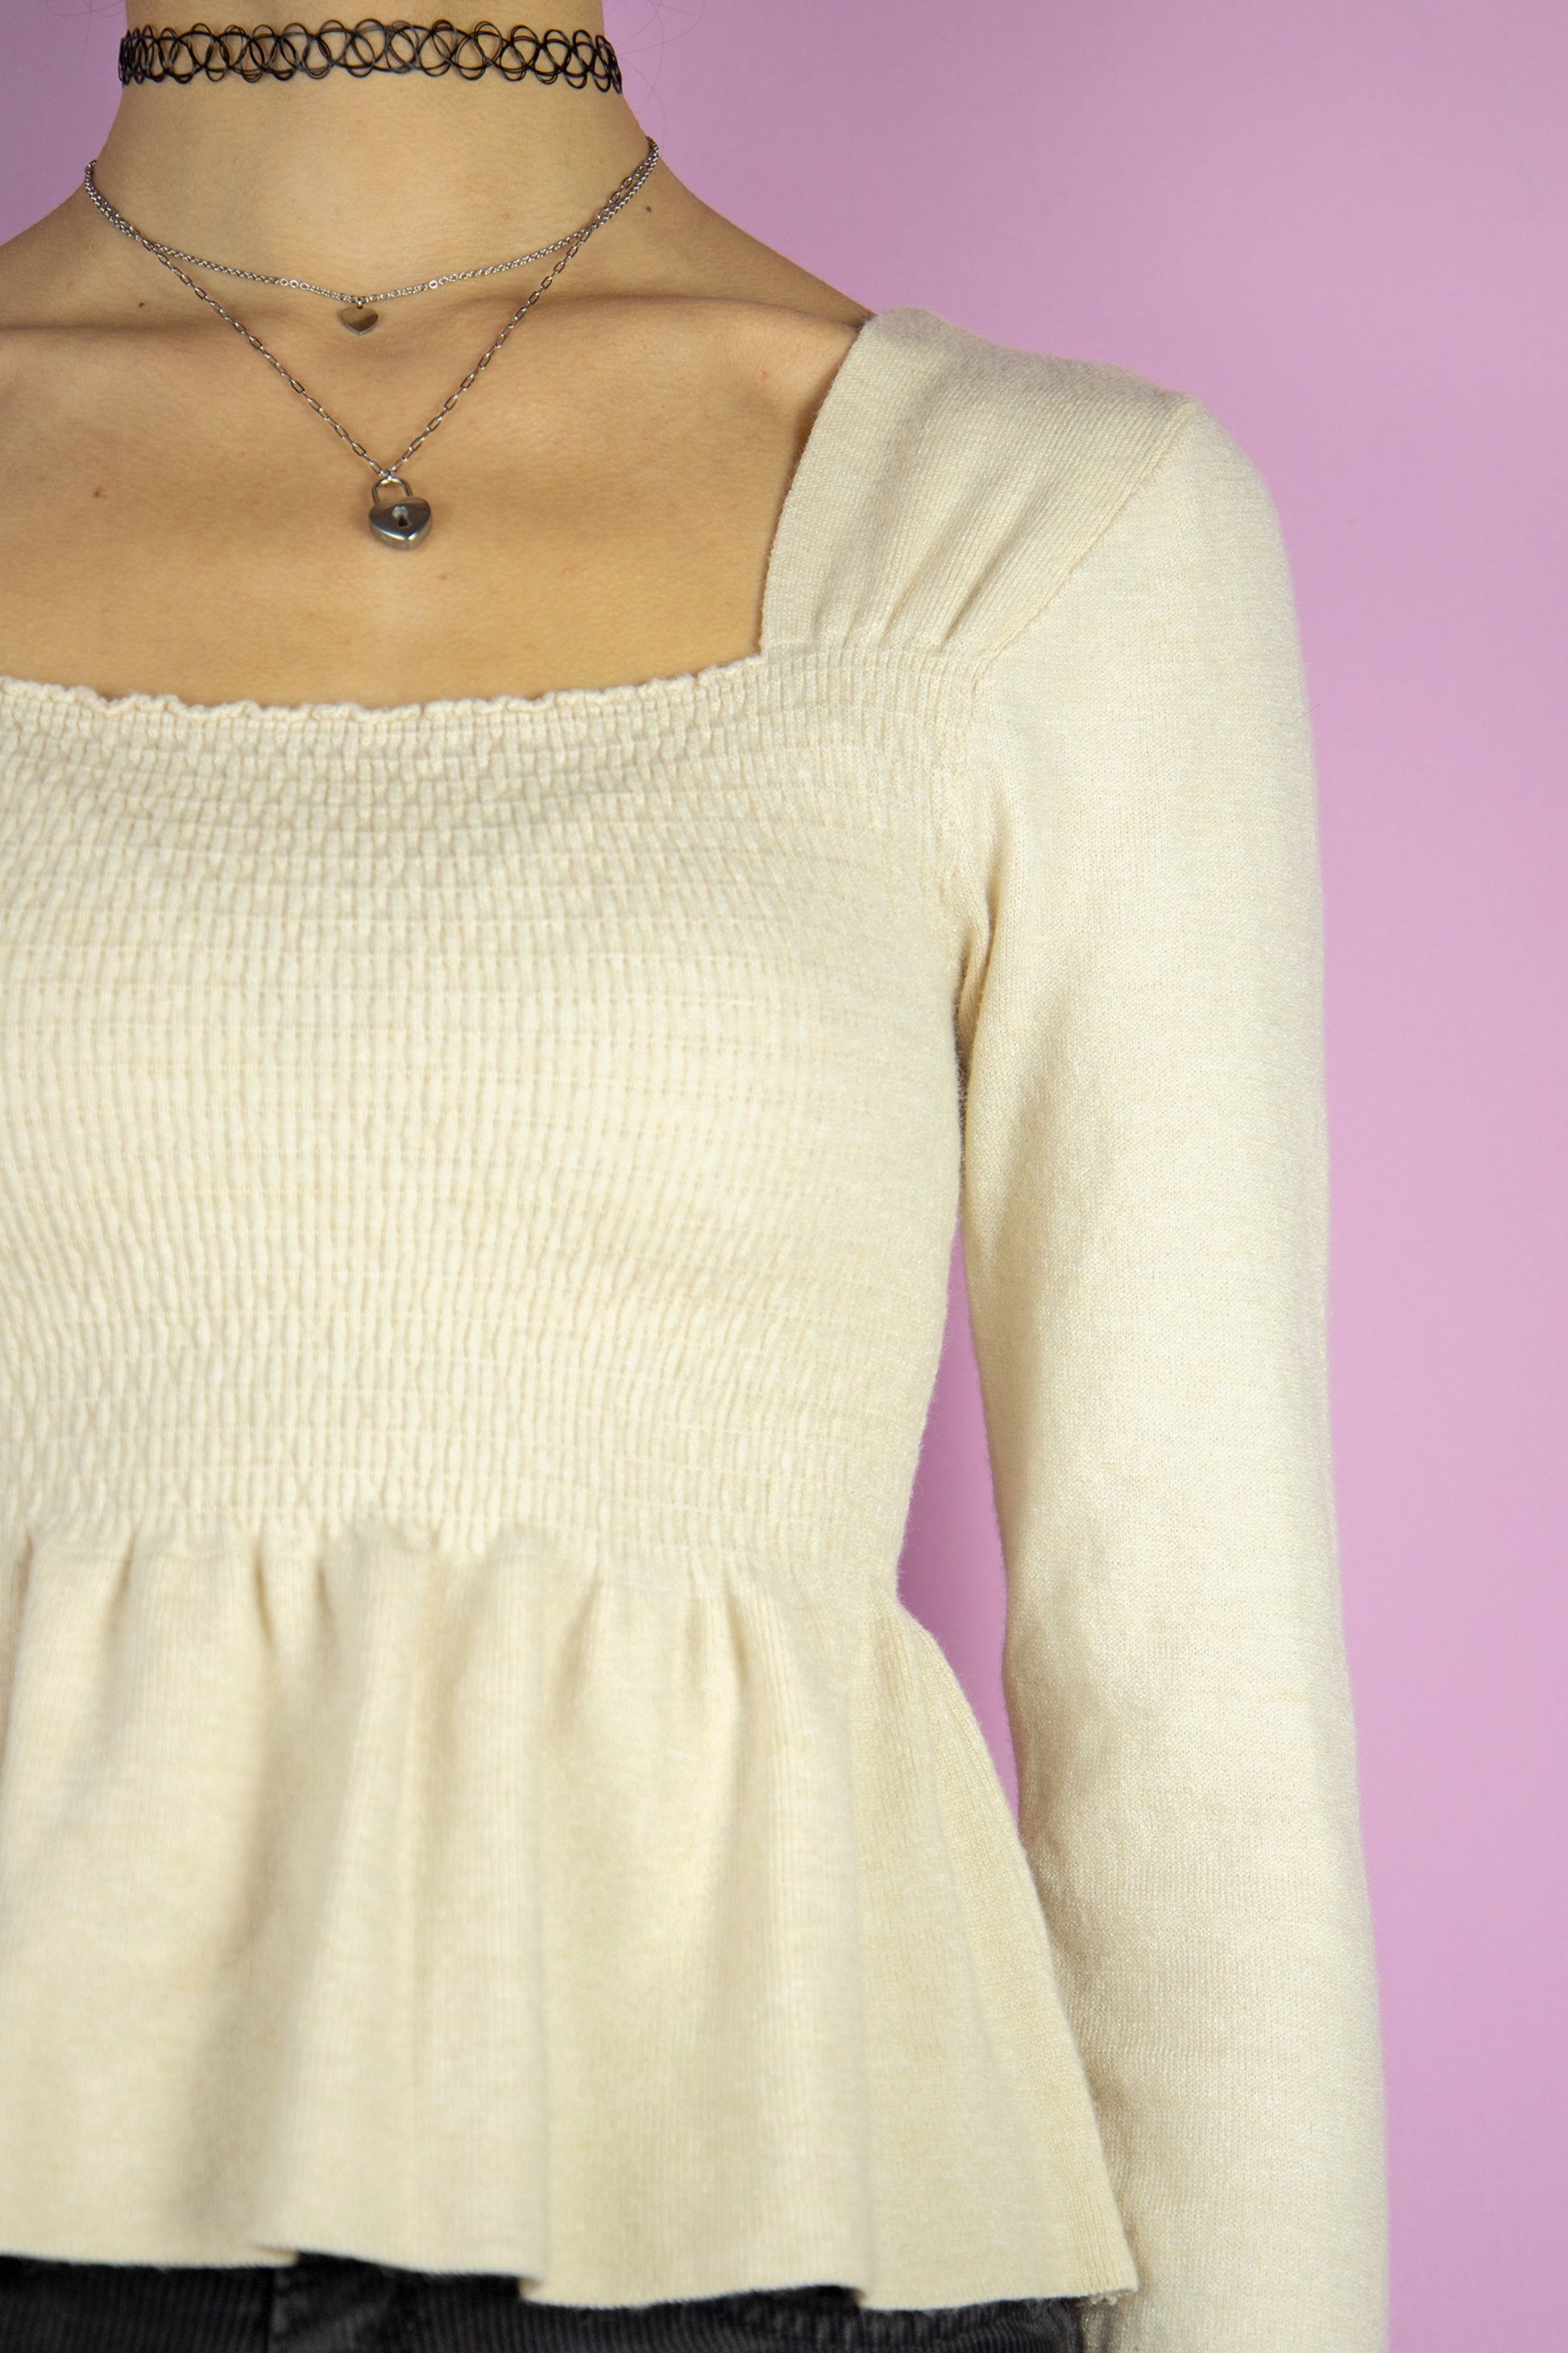 The Y2K Beige Shirred Top is a vintage ruched long sleeve knitted top. Fairy cottage 2000s sweater.